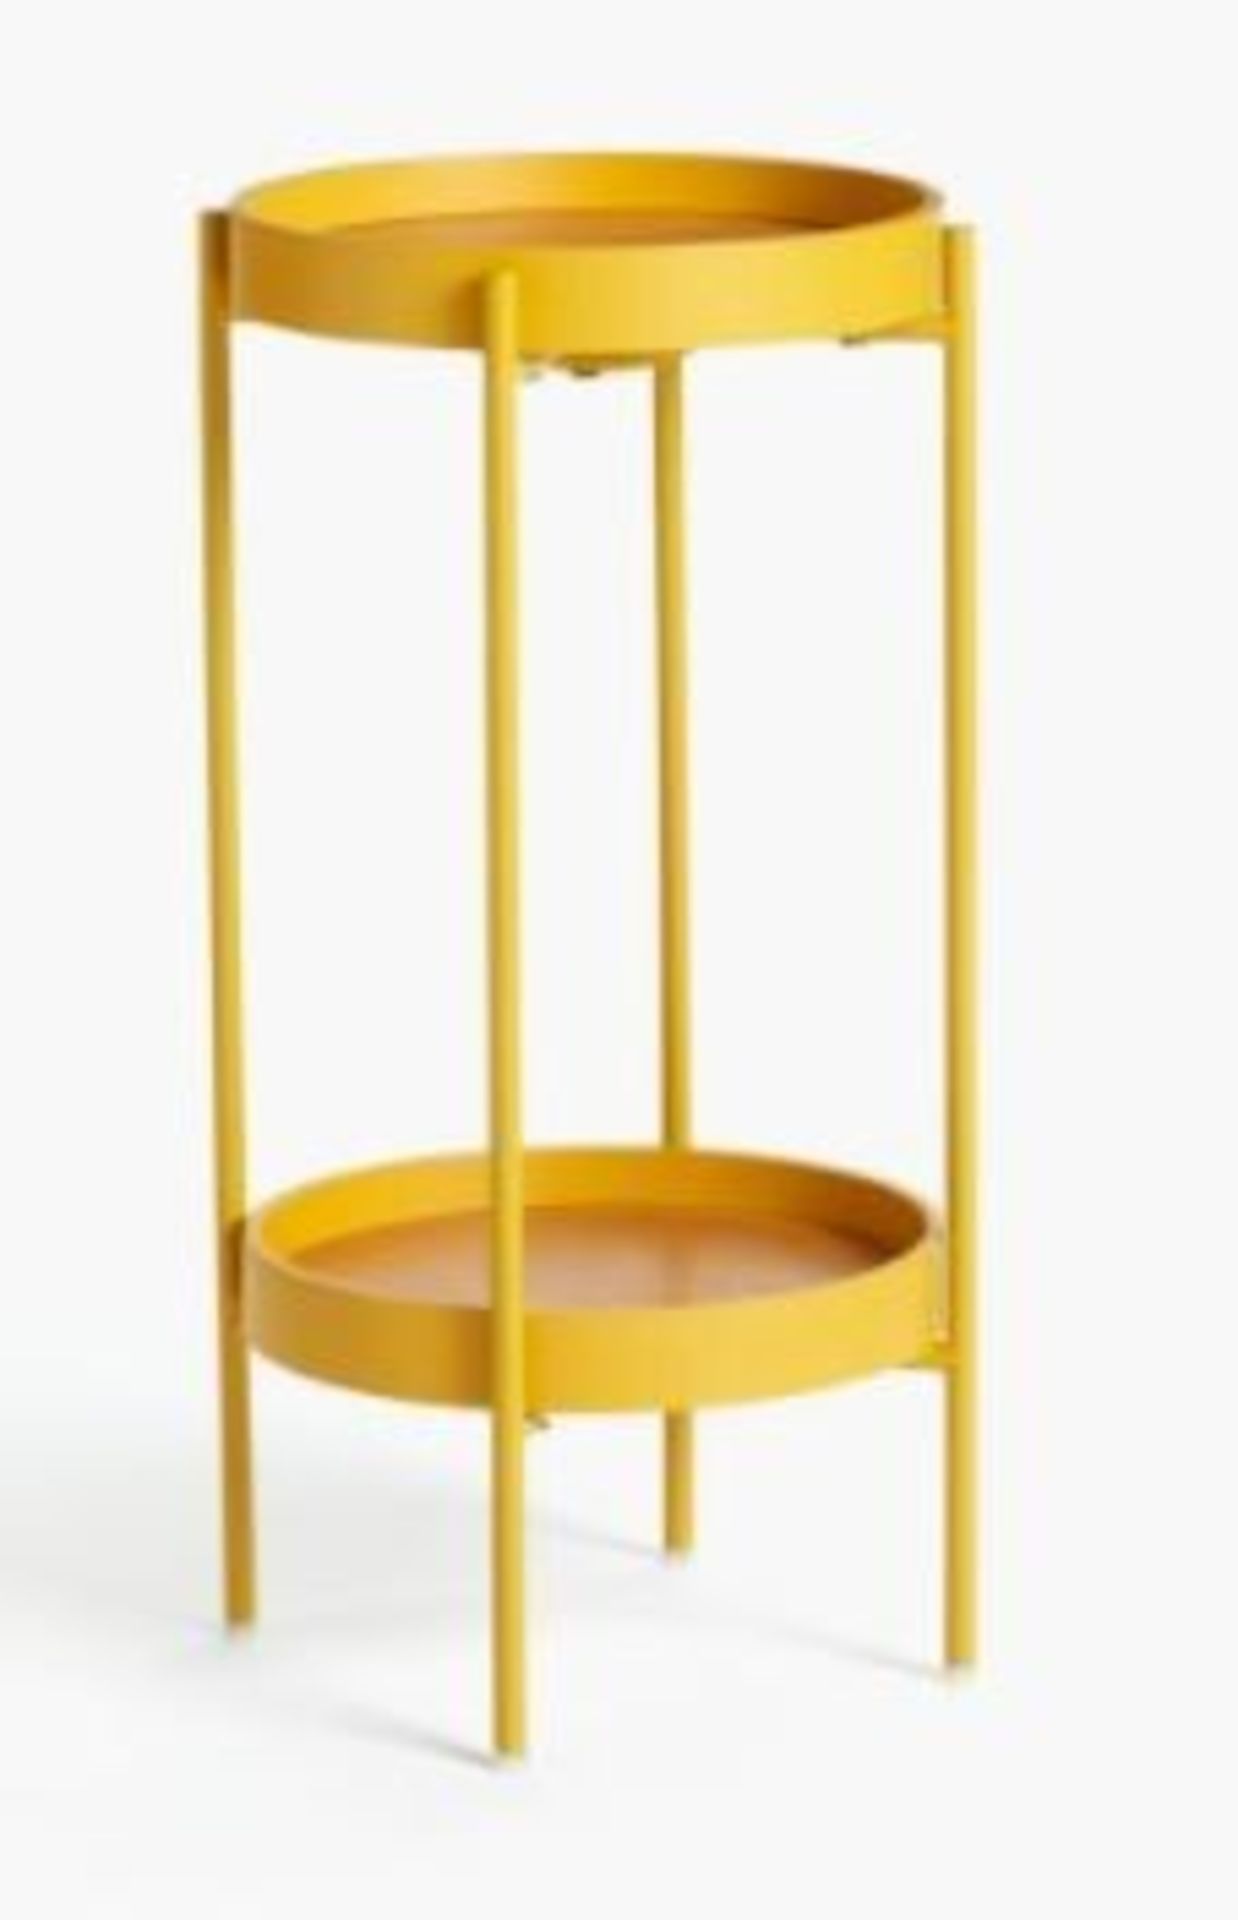 HOUSE BY JOHN LEWIS JAX SMALL SIDE TABLE IN MUSTARD